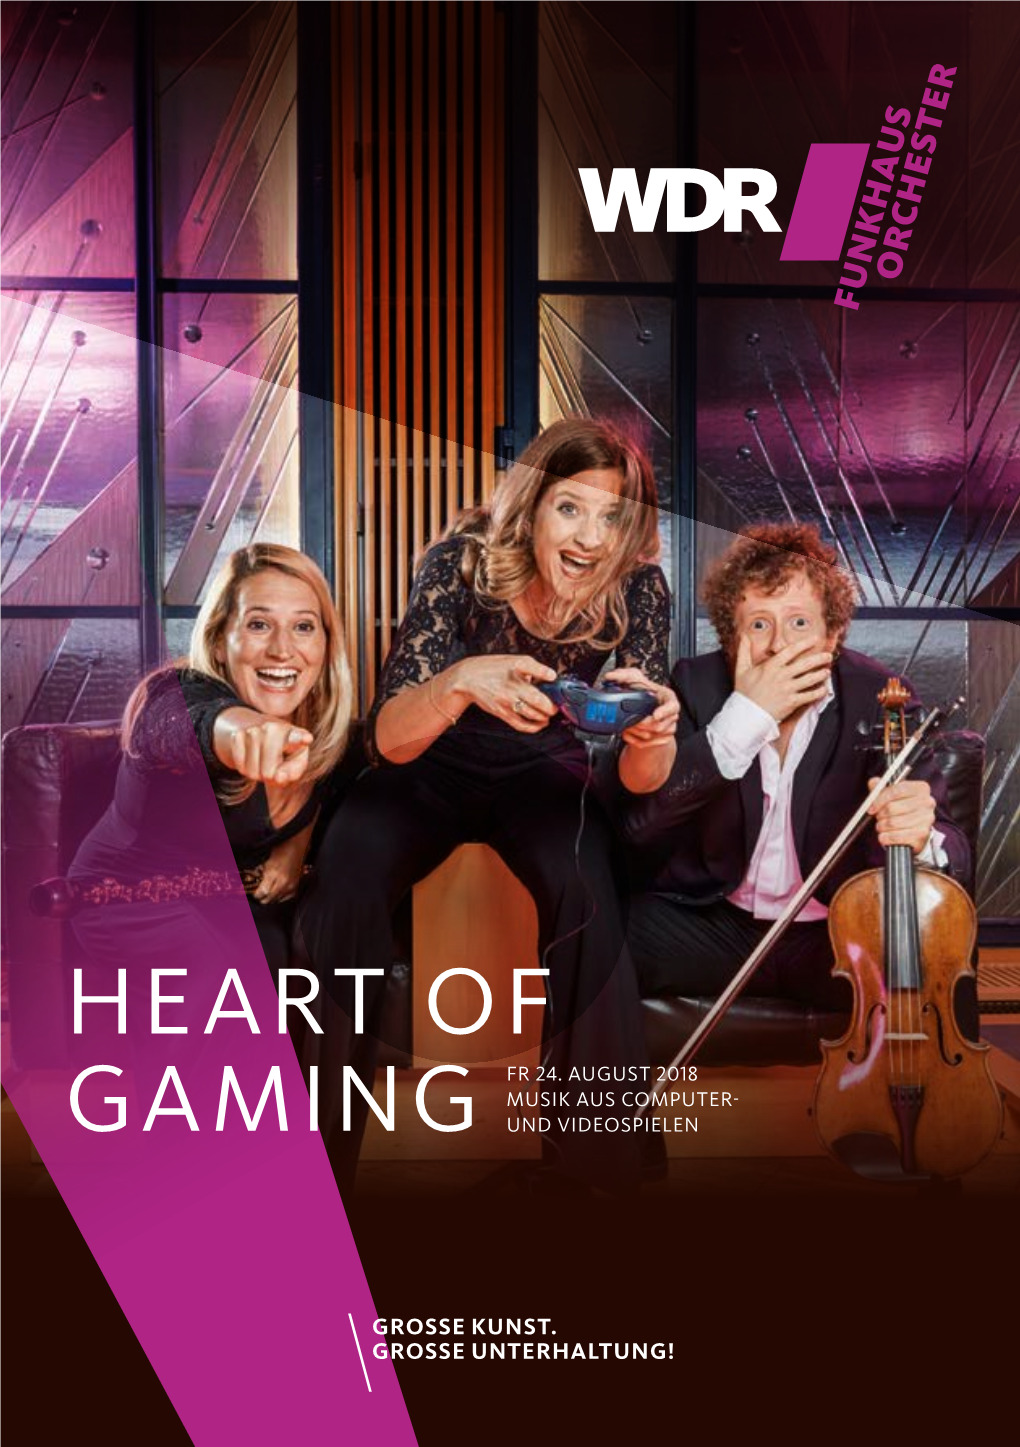 Heart of Gaming Fr 24. August 2018